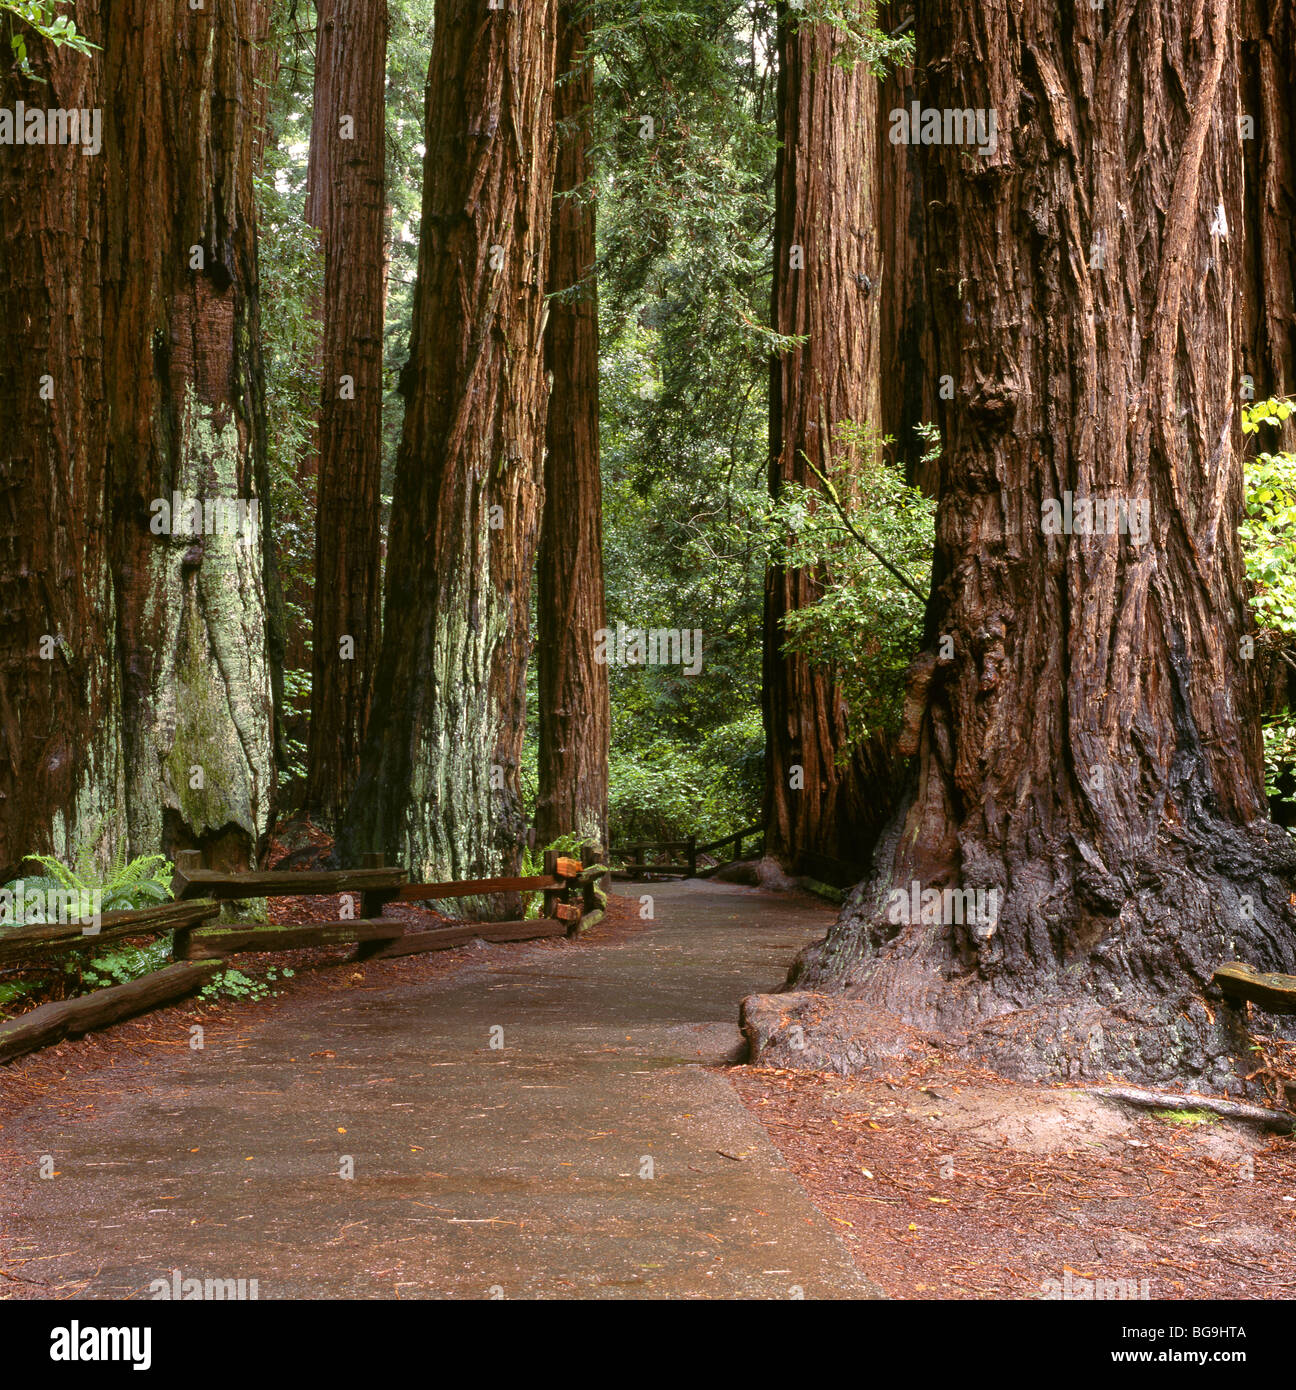 CALIFORNIA - Redwood trees in Muir Woods National Monument. Stock Photo